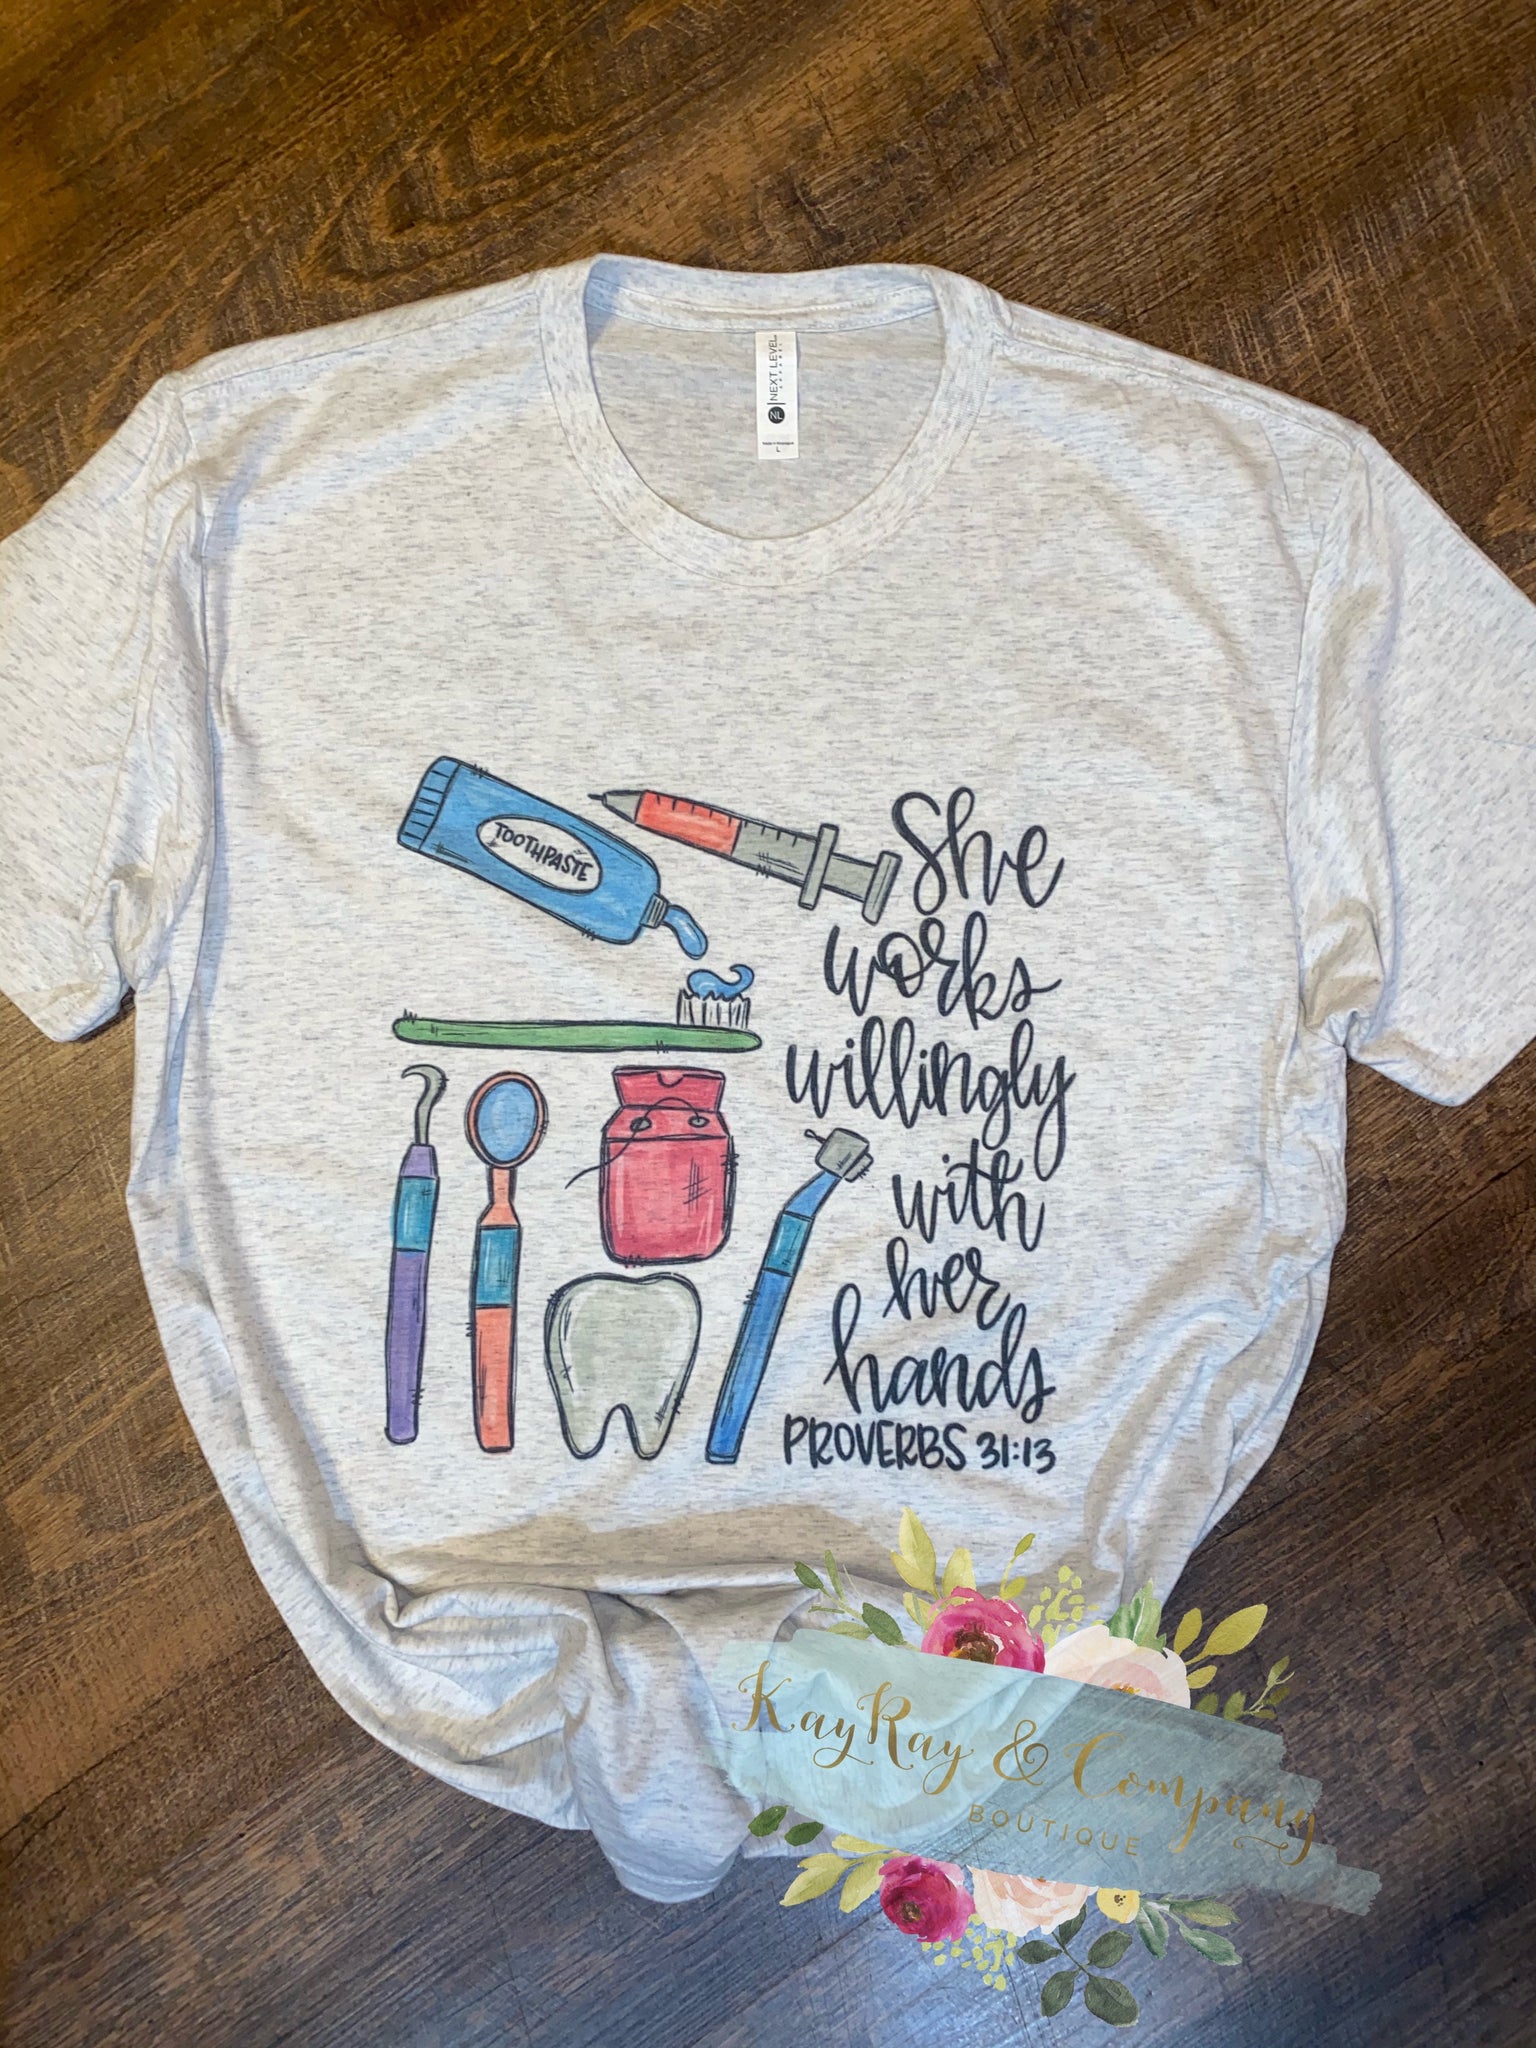 Dental Assistant She works willingly with her hands T-shirt